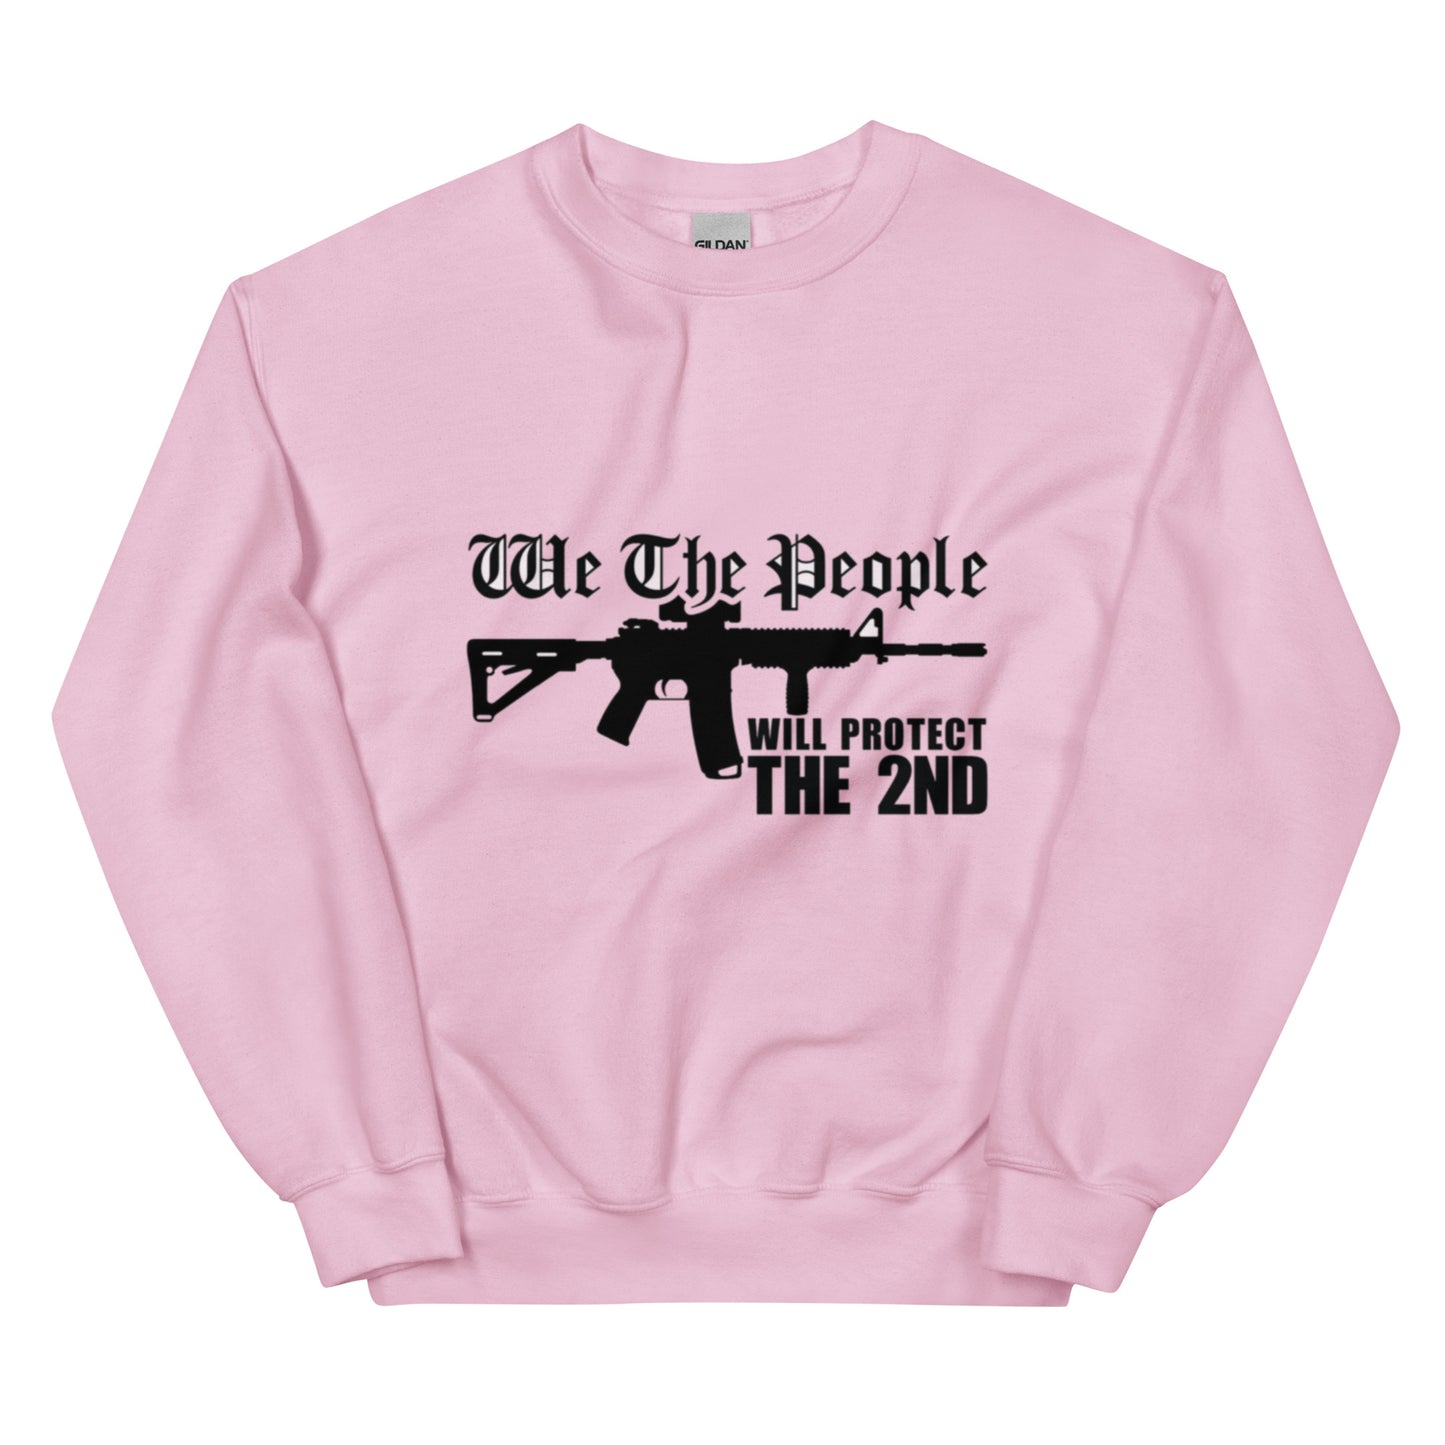 We the People will Protect the 2nd Unisex Crew Neck Sweatshirt